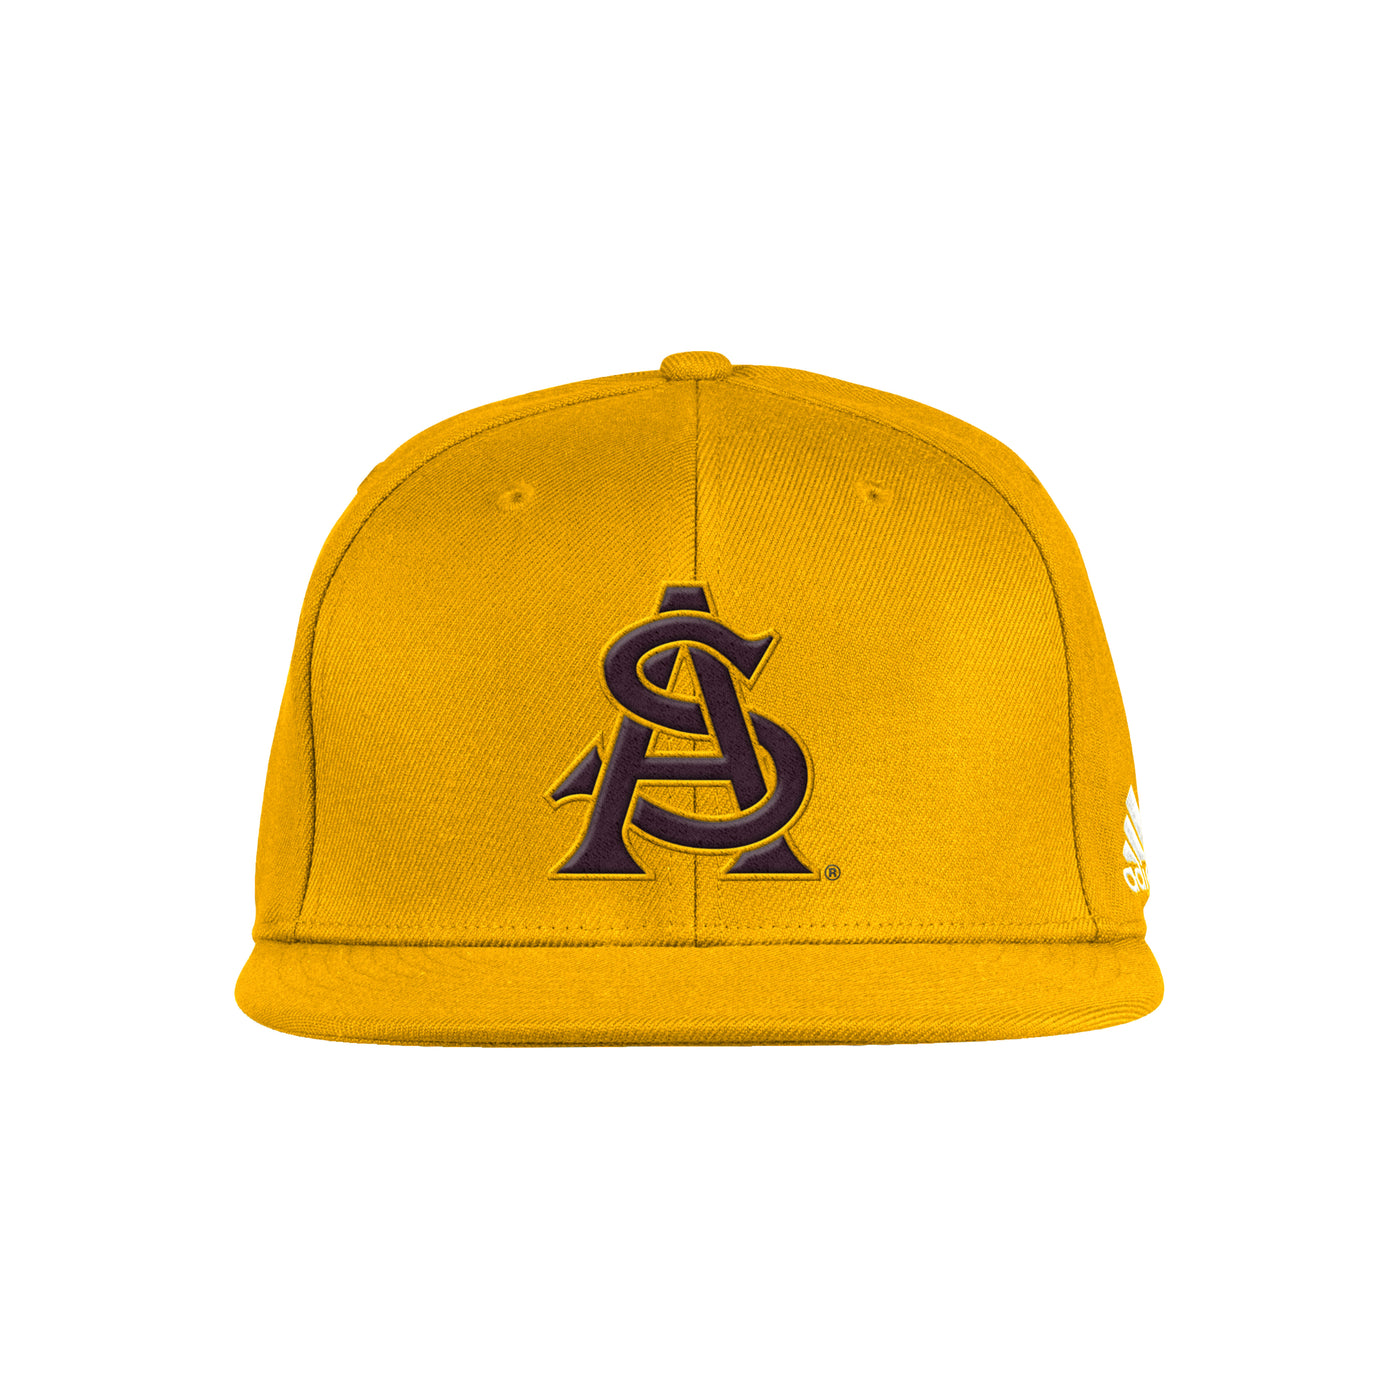 ASU gold fitted hat with a maroon interlocking 'A' and 'S'